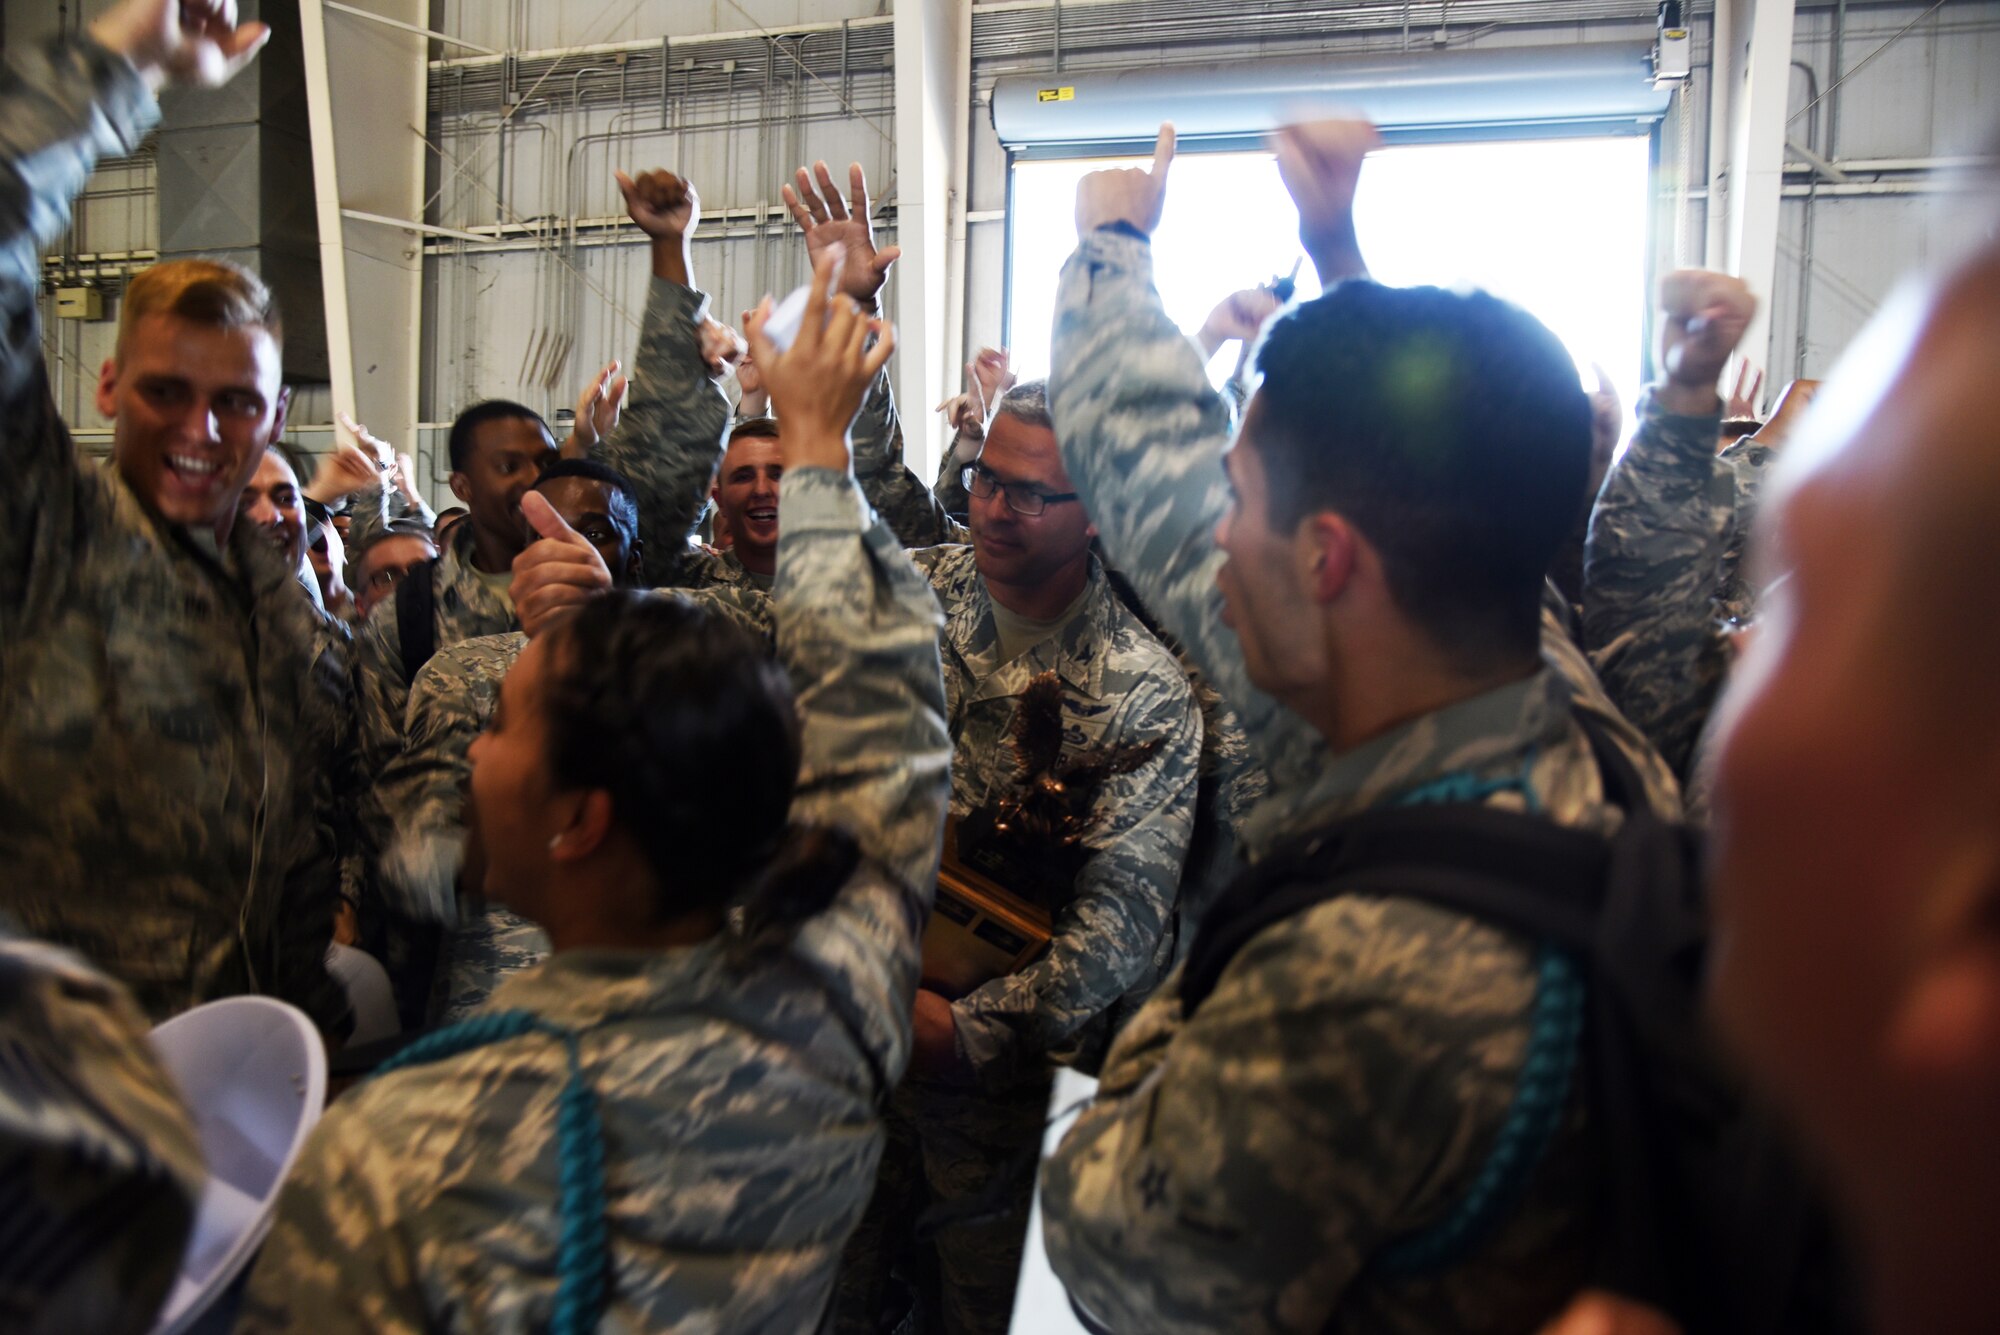 U.S. Air Force Col. Alex Ganster, 17th Training Group commander, presents the spirit award to the 312th Training Squadron during the 17th TRG drill competition at the Louis F. Garland Department of Defense Fire Academy on Goodfellow Air Force Base, Texas, June 22, 2018. The spirit award goes to the squadron with the best participation during the drill competition. (U.S. Air Force photo by Staff Sgt. Joshua Edwards/Released)